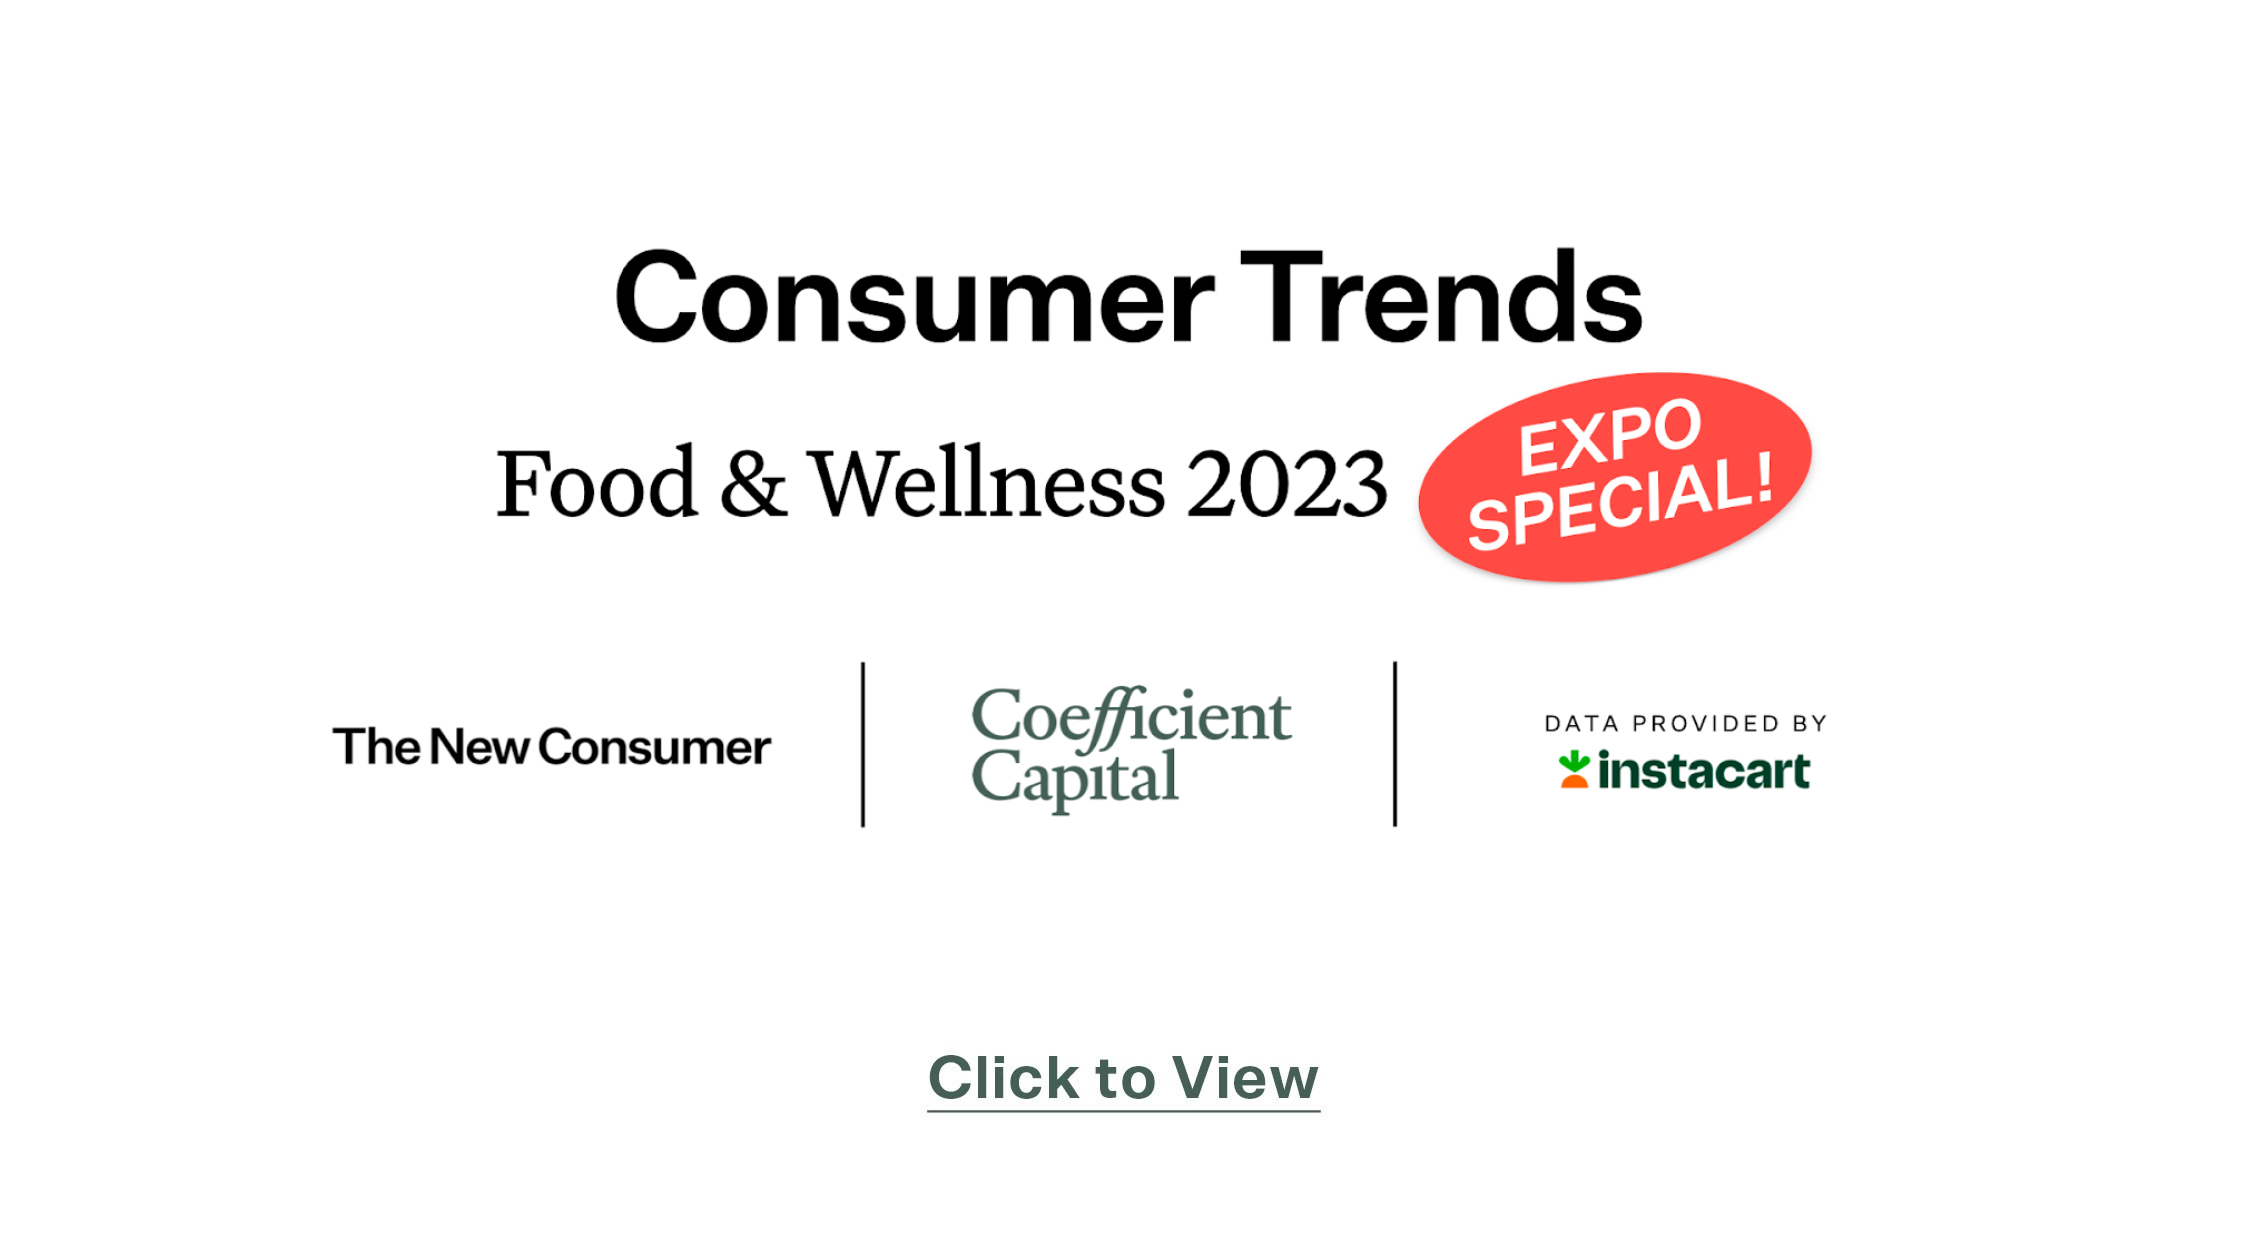 Consumer Trends 2023 Food & Wellness 2023 Expo Special